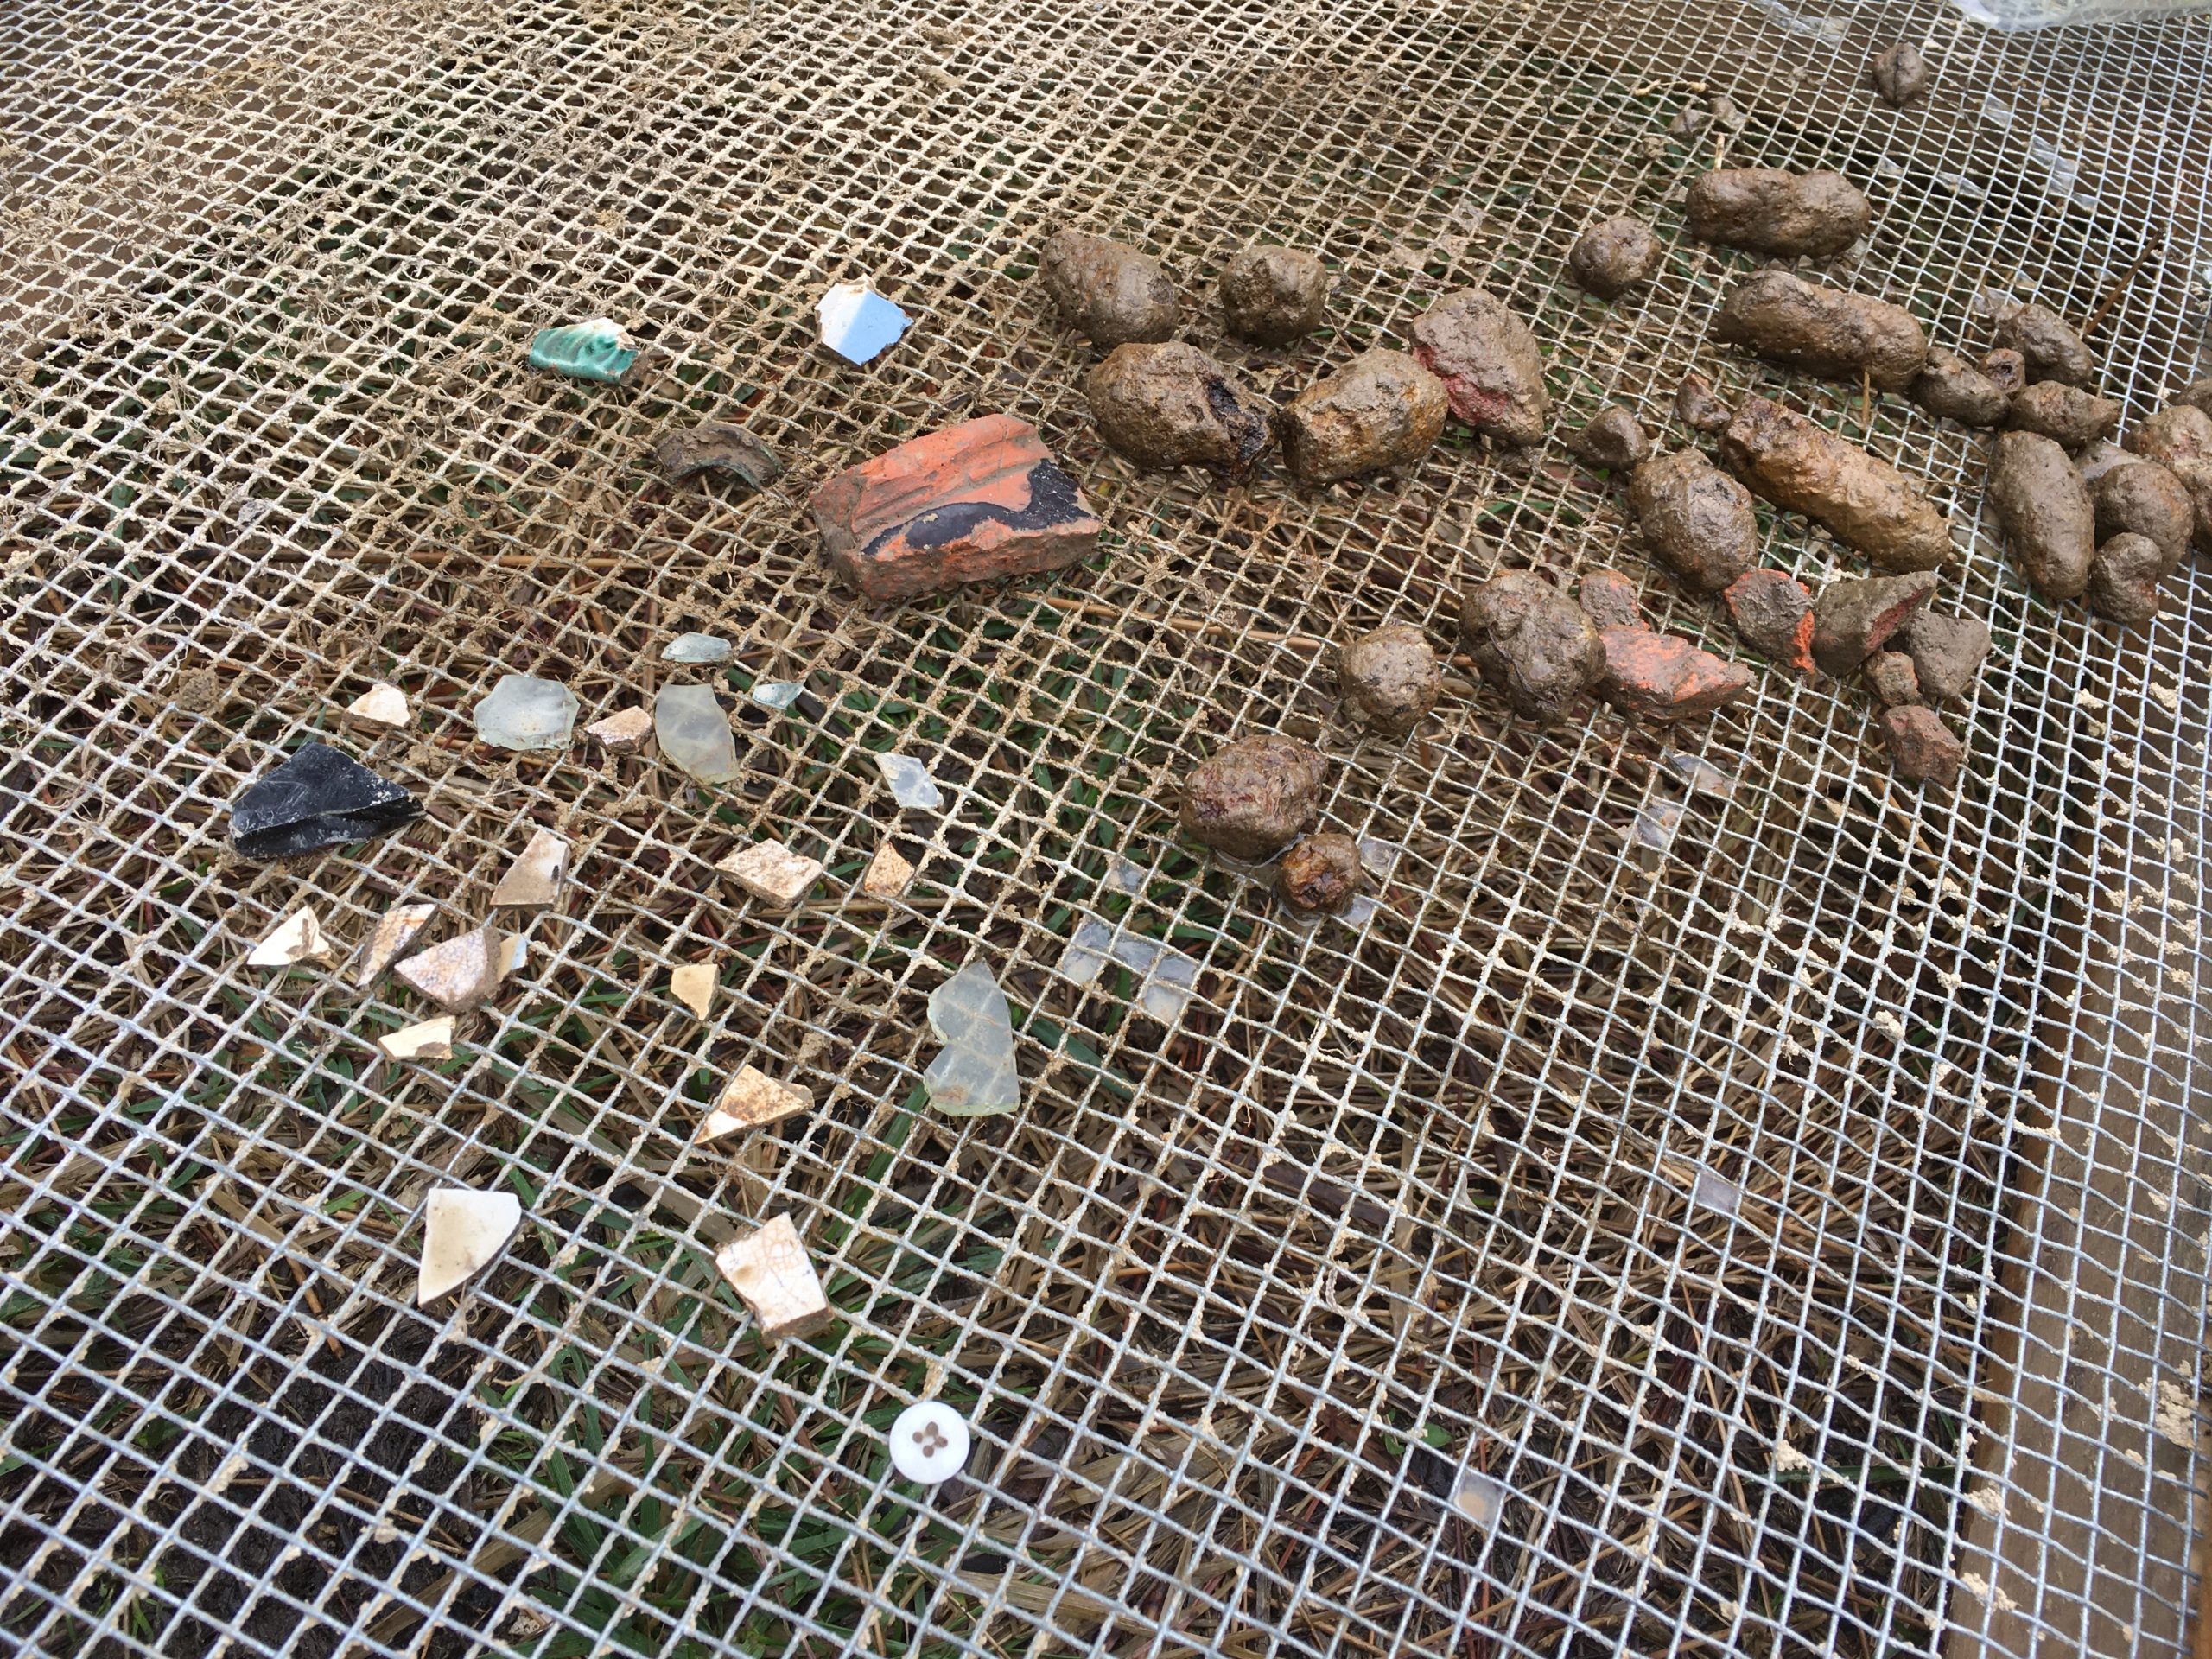 Artifacts found at Ben Ross' homesite in the Blackwater National Wildlife Refuge include a button, bits of pottery, glass and nails [Photo credit: Maryland Department of Transportation]